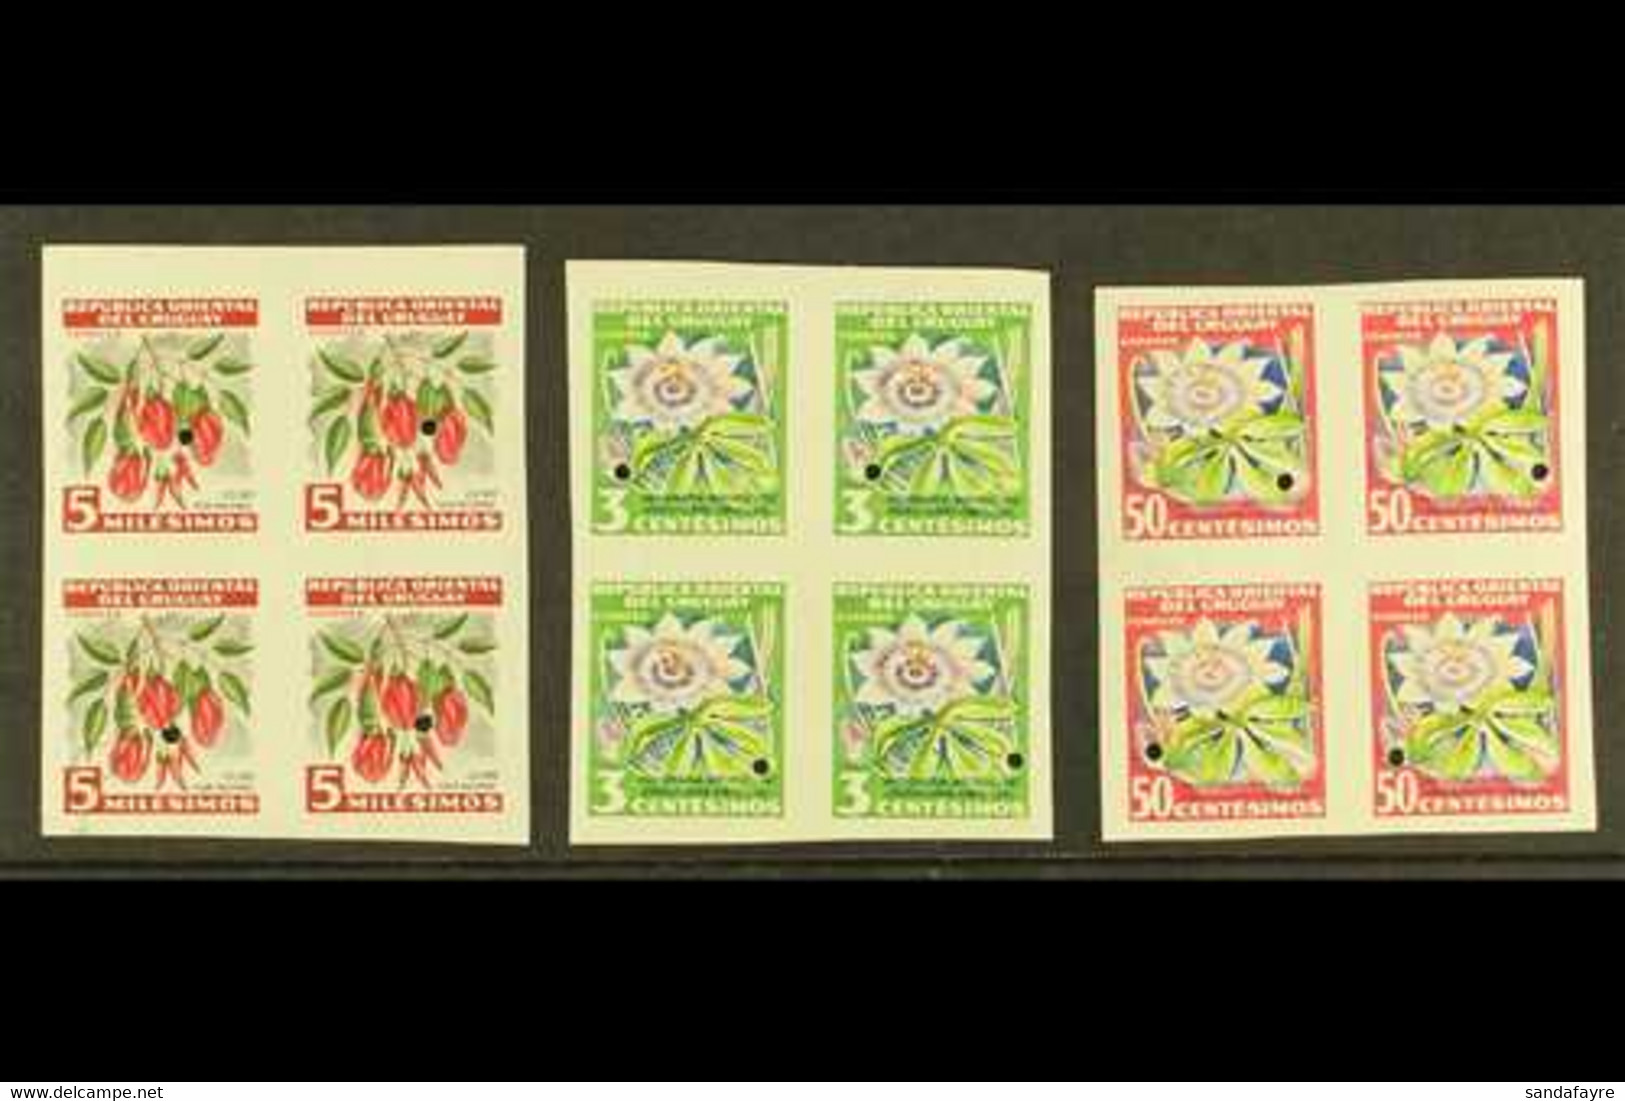 WATERLOW IMPERF PROOFS 1954 Flowers Definitives With 5m Ceibo (National Flower), SG 1028, 3c Passion Flower, SG 1031, An - Uruguay